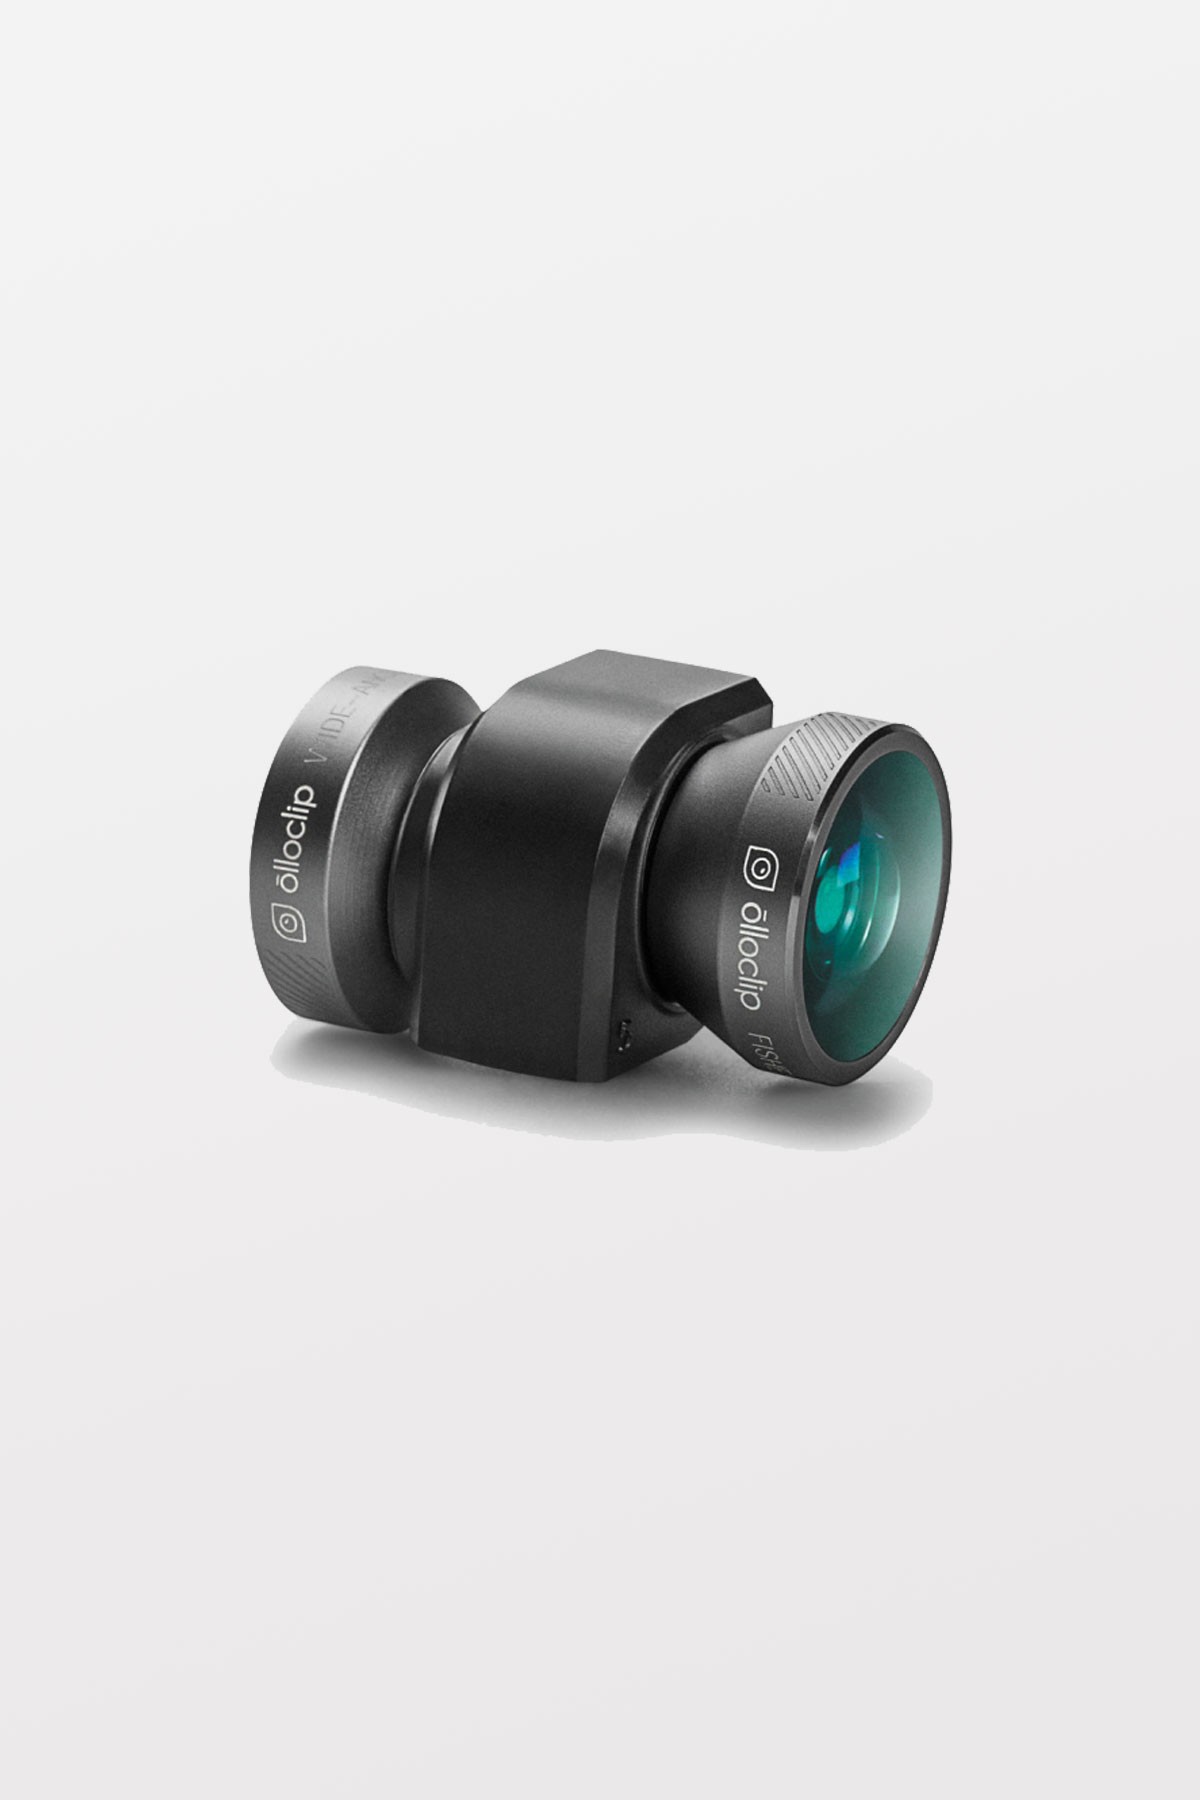 Olloclip 4 in 1 Lens [iPhone 5/5S SPACE GREY]